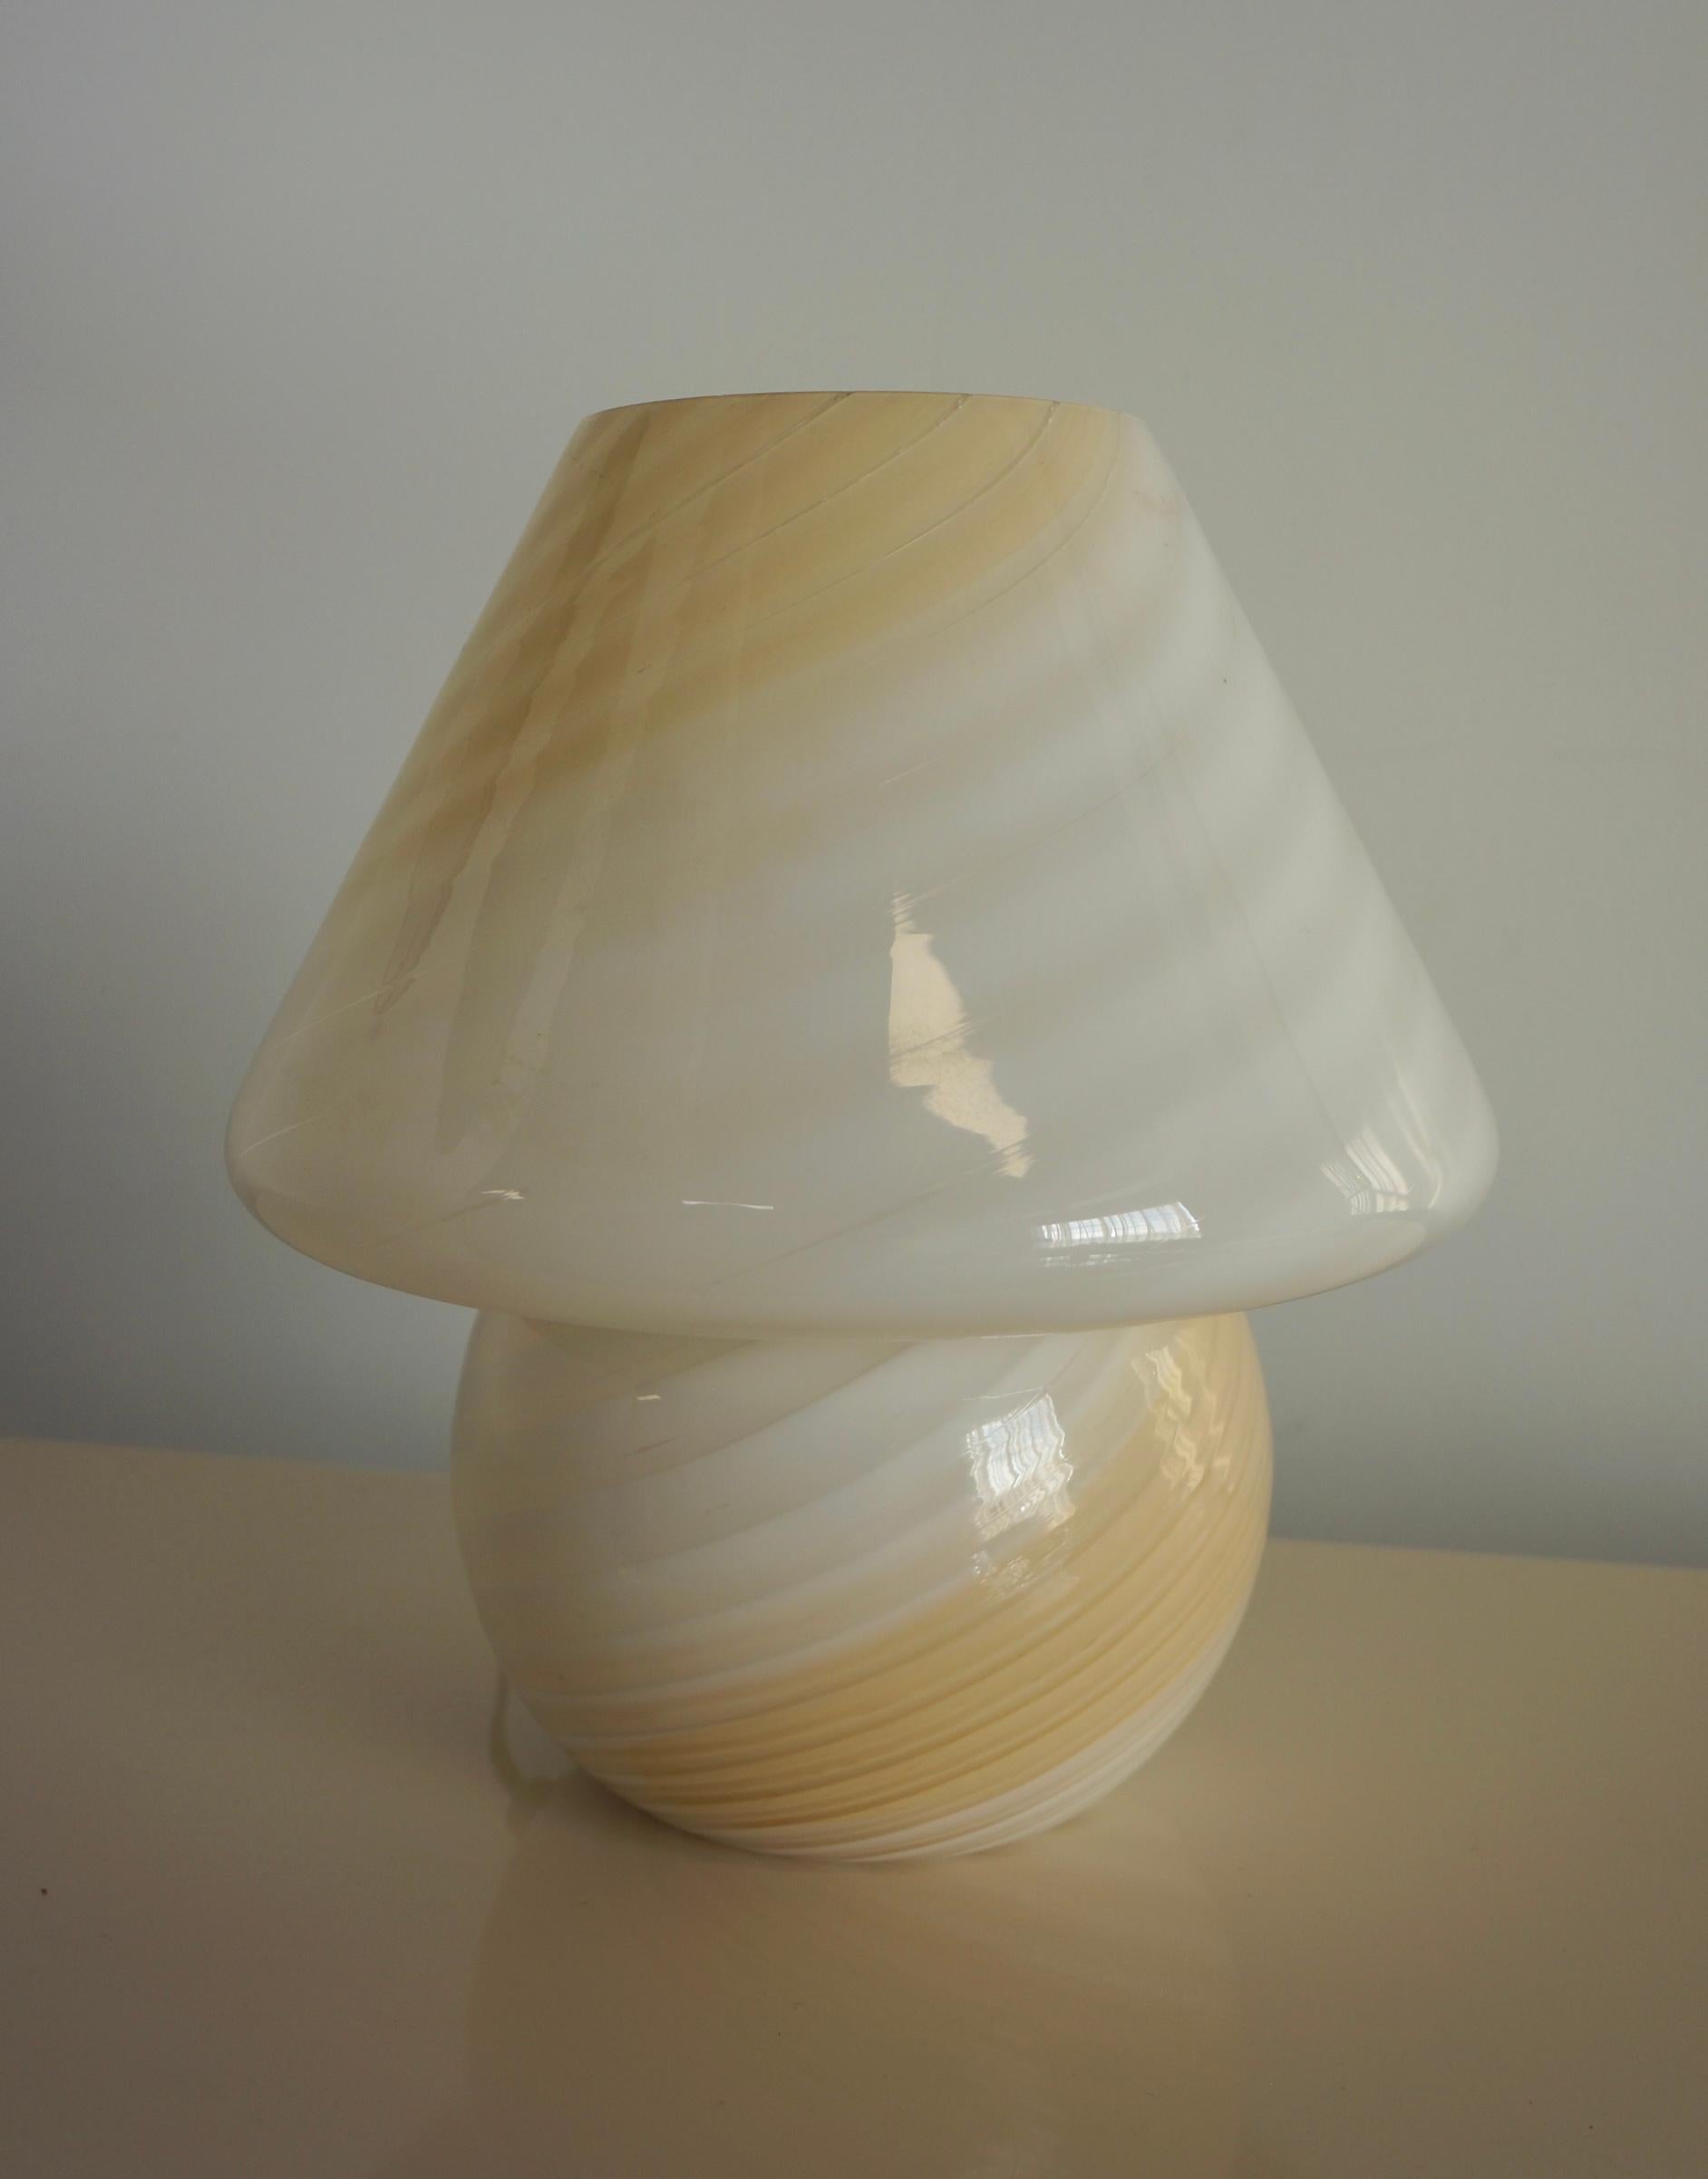 Medium sized cream and white ombré  Murano mushroom lamp made in the swirl technique. Murano Art glass is considered to be one of most expertly crafted art glass in the world and is made with incredible detail. The murano mushroom lamps were